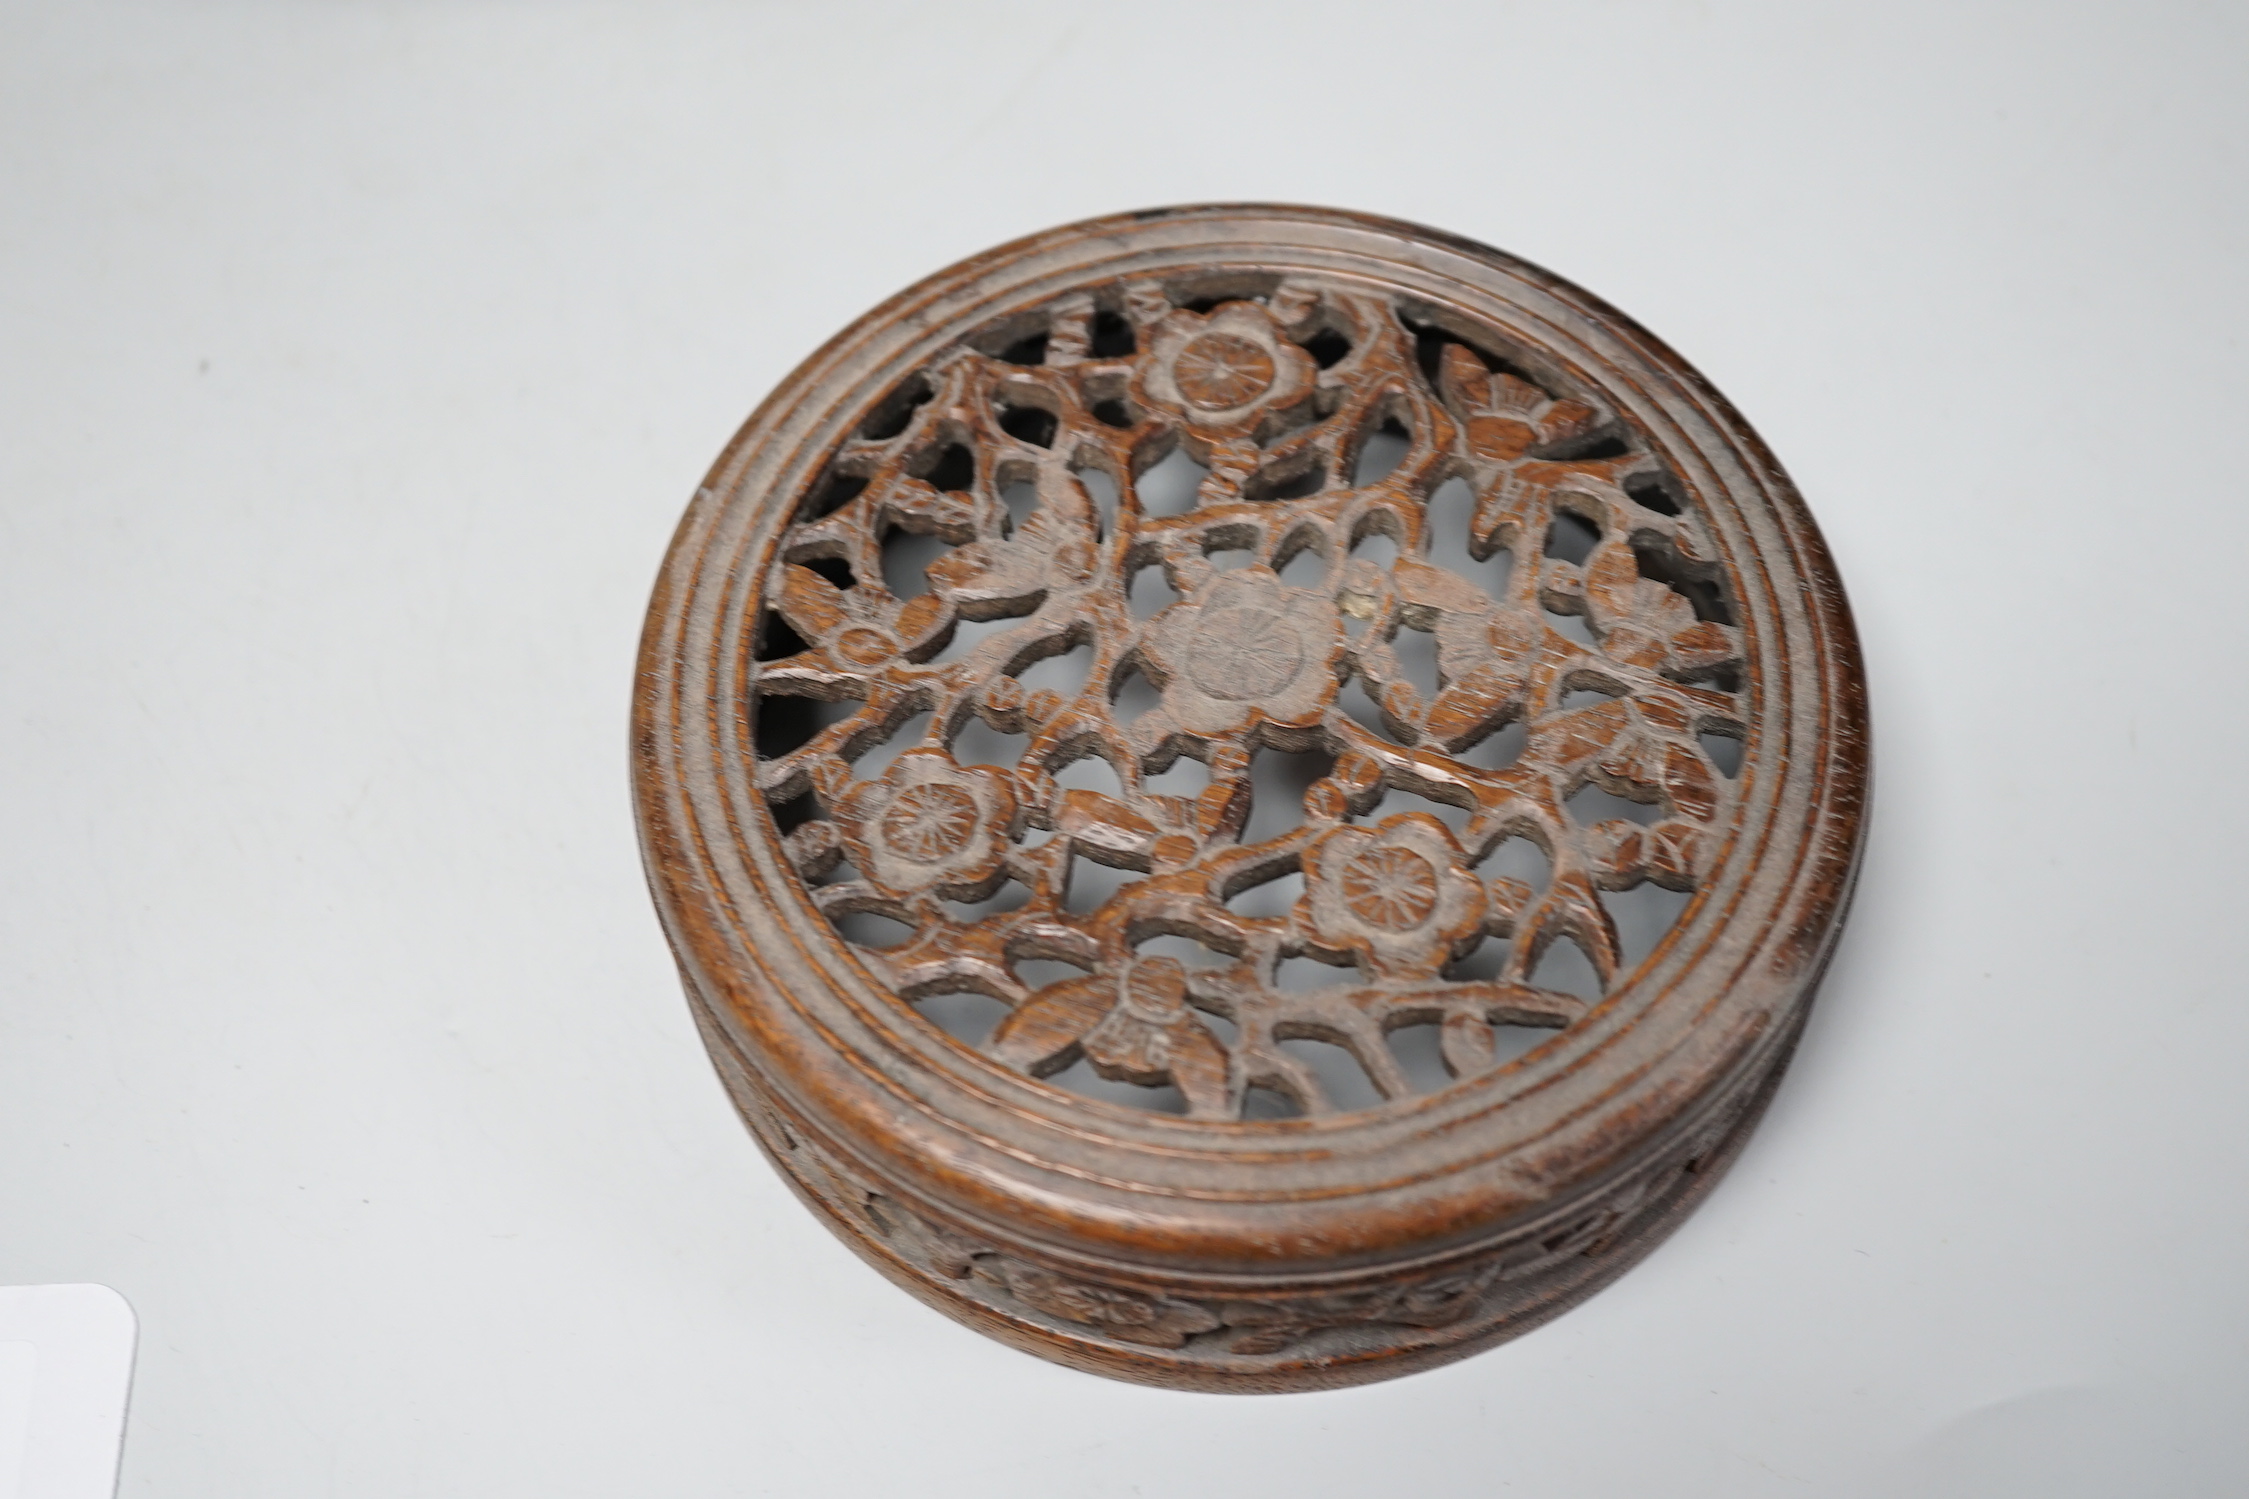 A 19th century Chinese blue and white prunus jar and carved wood cover, 24cm